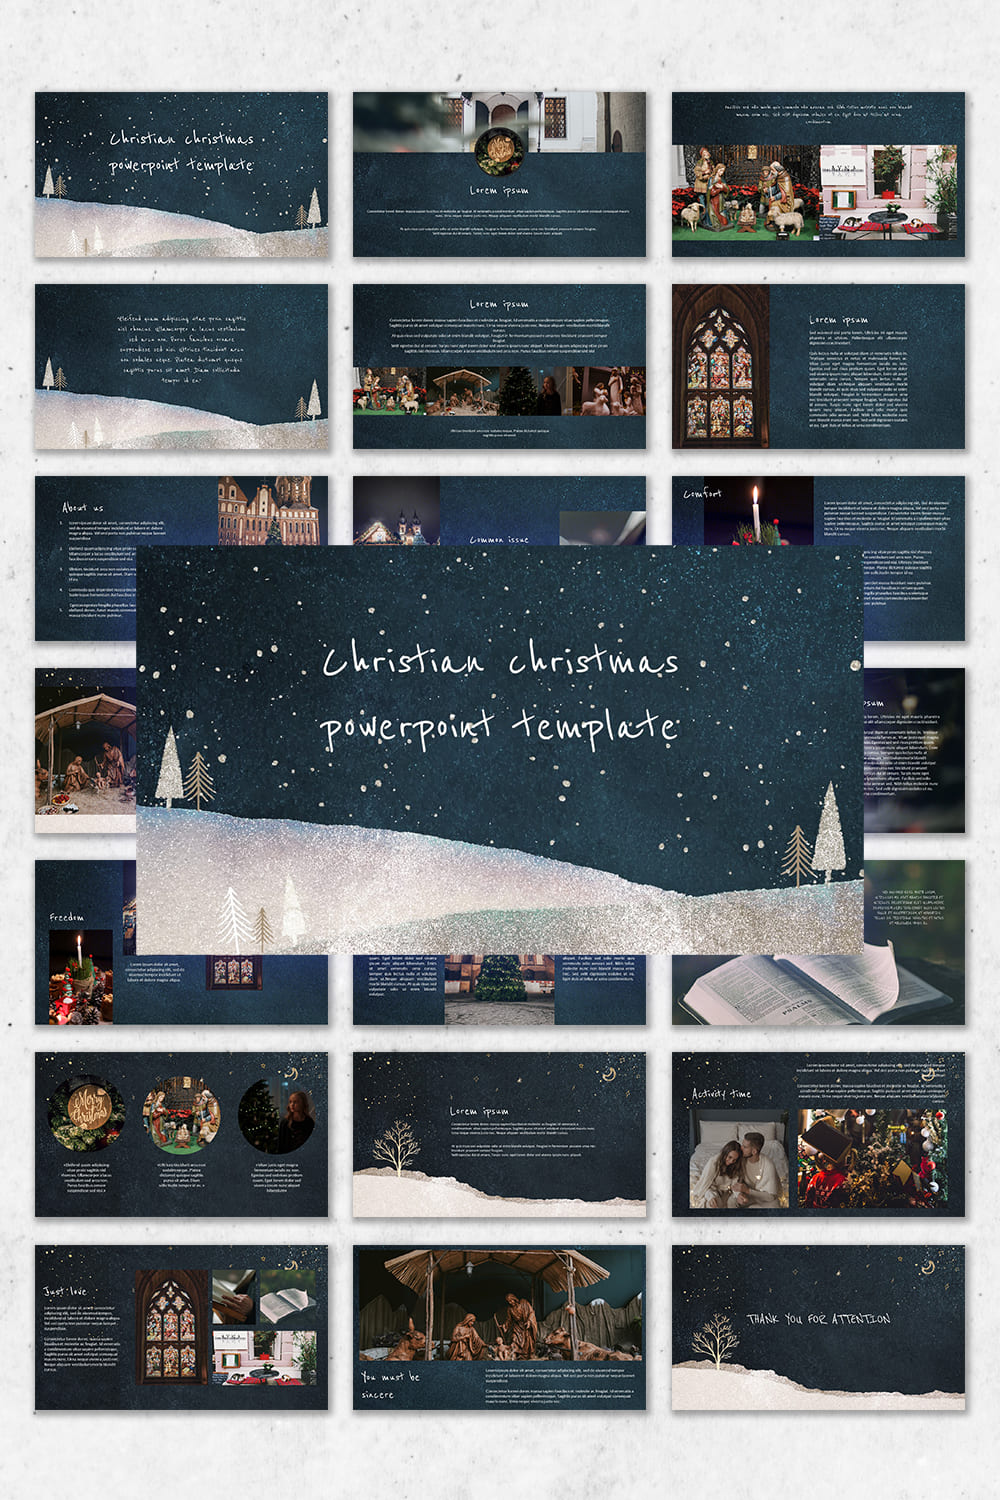 Set of adorable images with christian christmas powerpoint template.